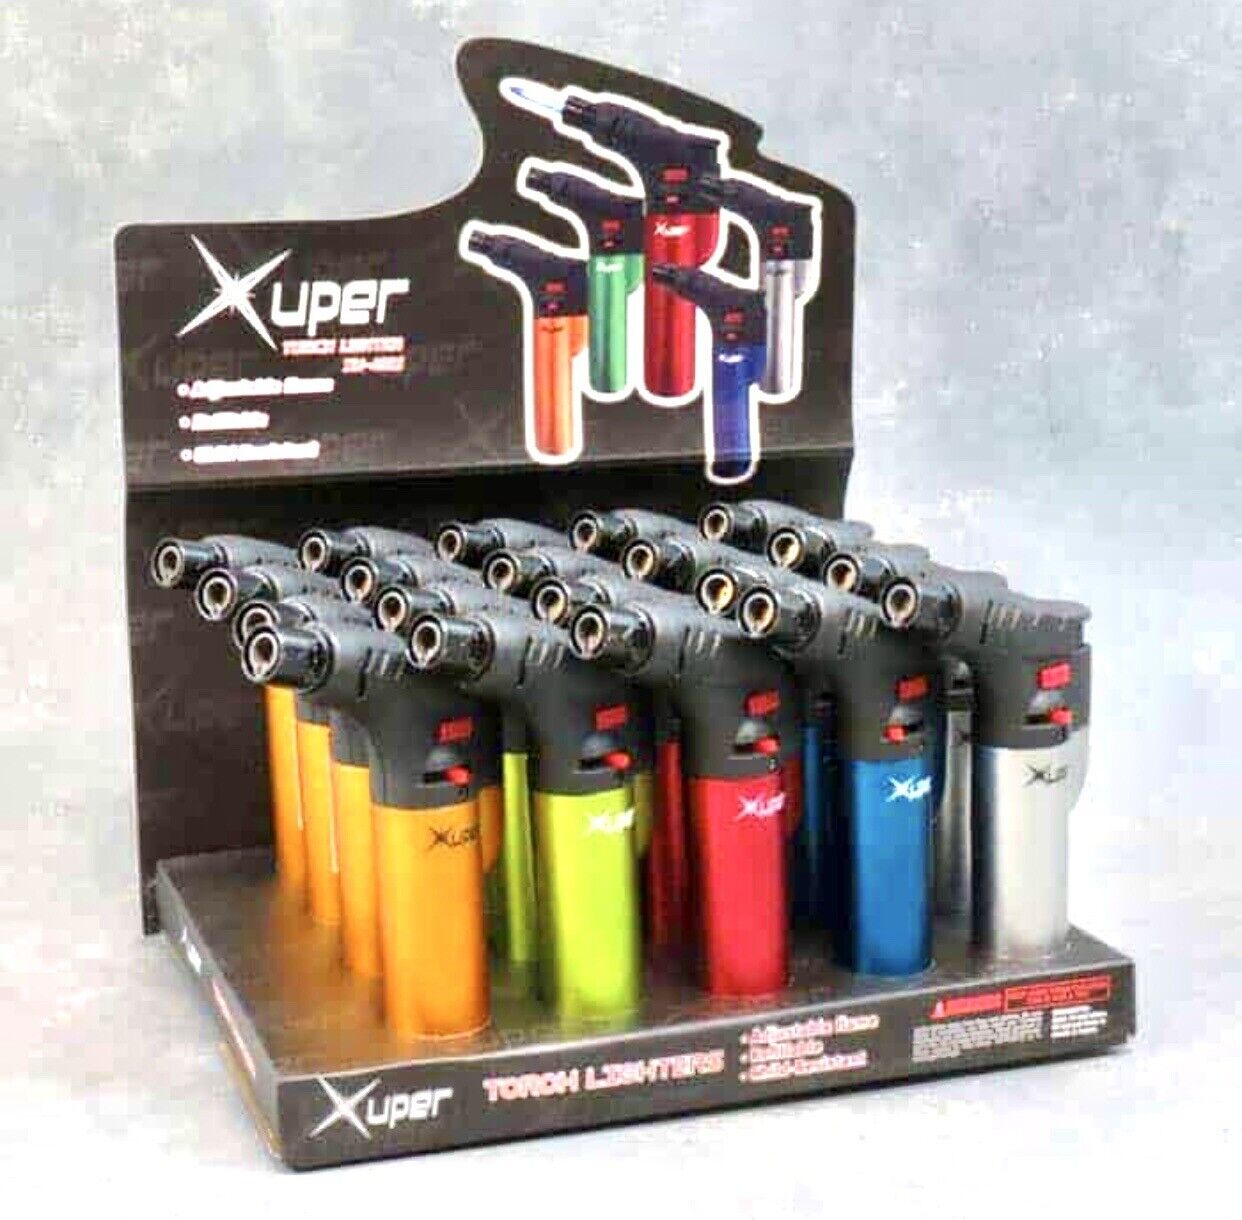 Xuper Torch Lighter XU-49M Adjustable Flame F/ Size Metallic w/ Colors lot of 5